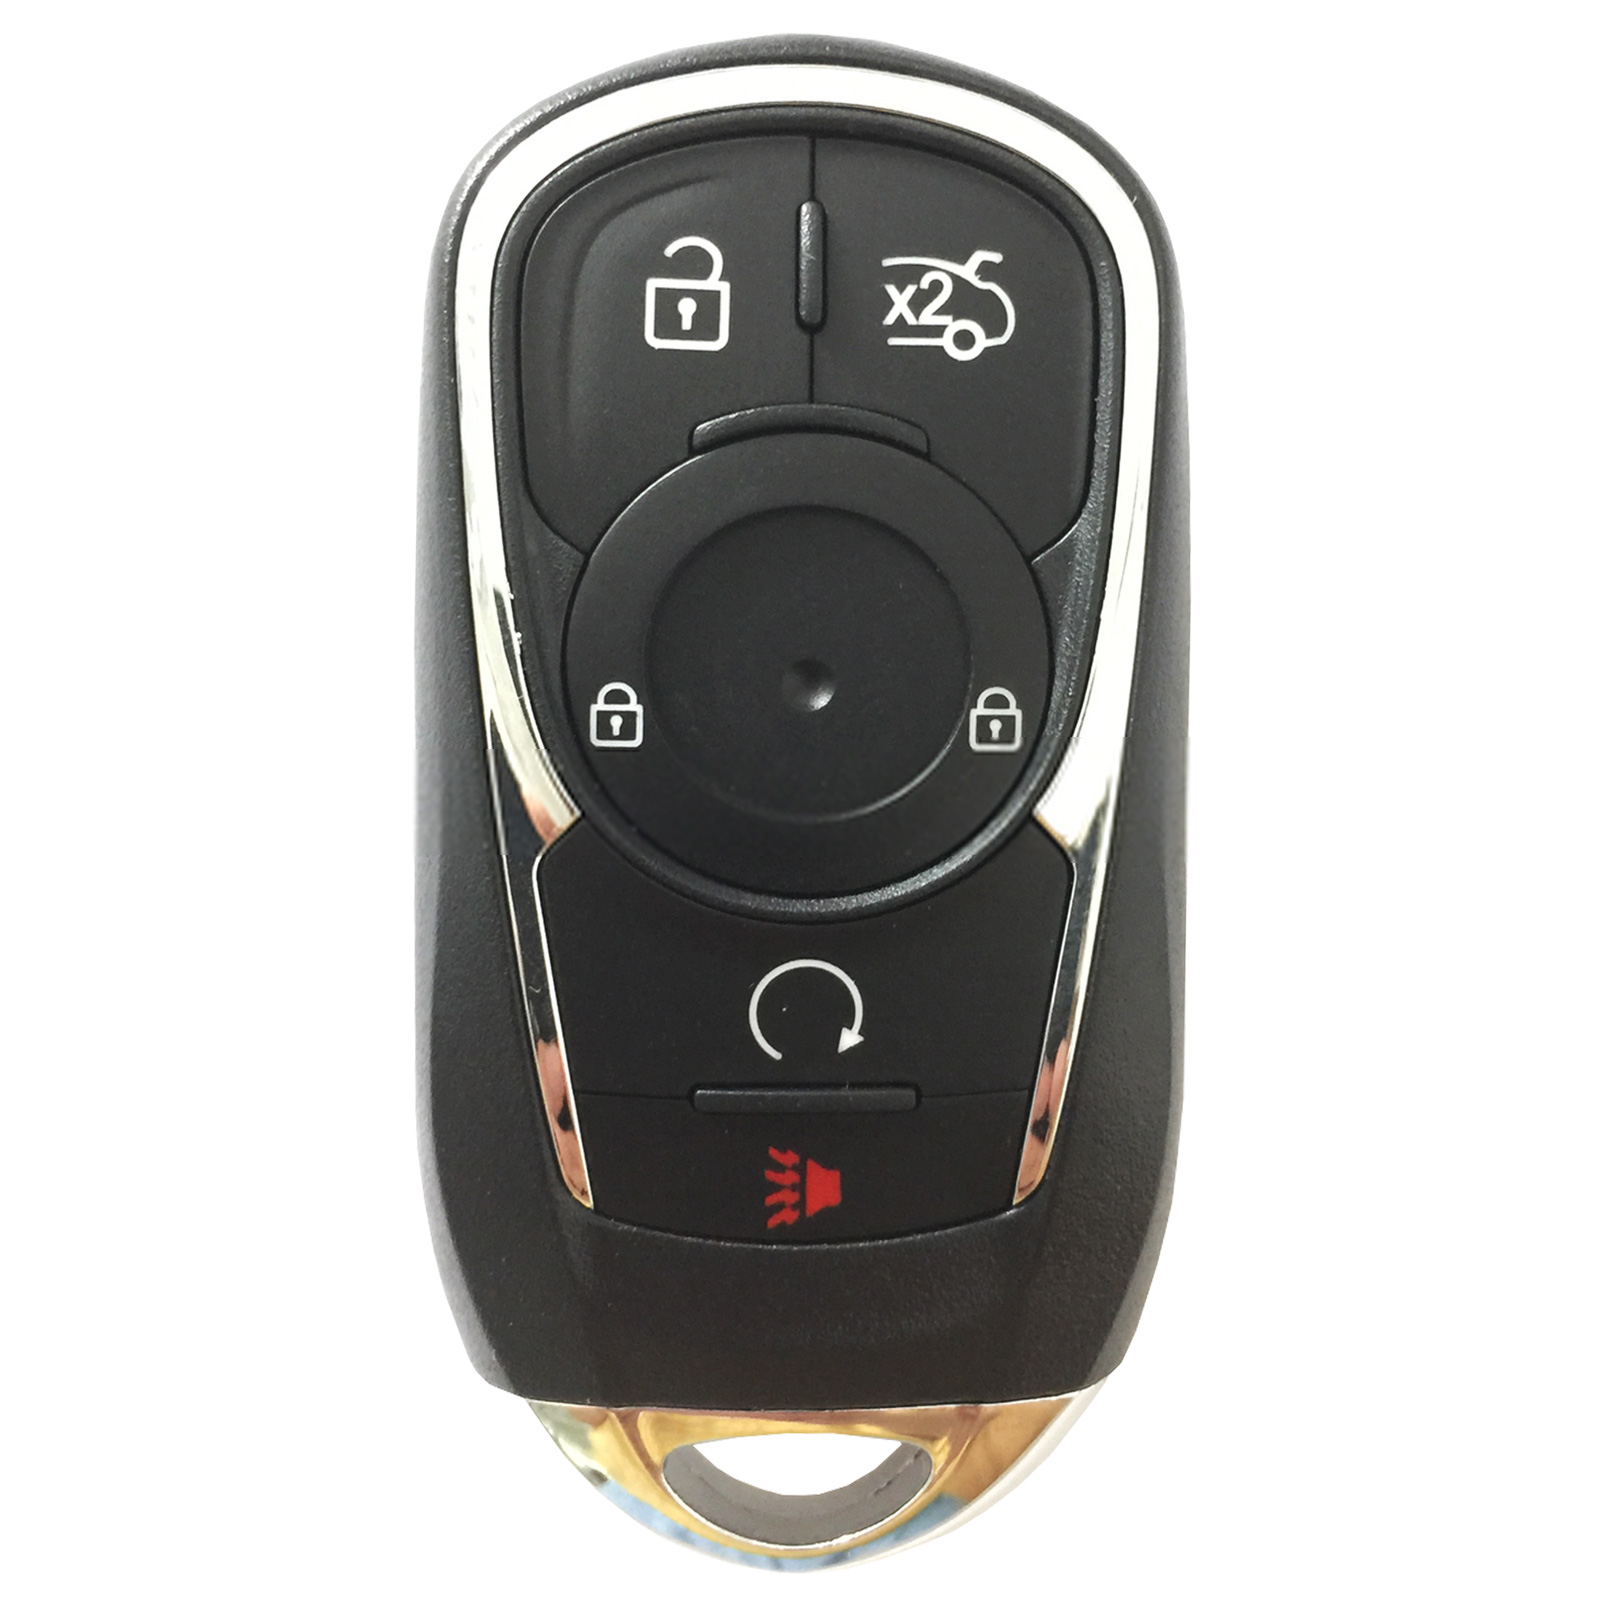 KYDZ04 Form Smart Model Model GM25-4-1 Key Without Spare Key European Version 4+1 Buttons European Edition - Pack of 5